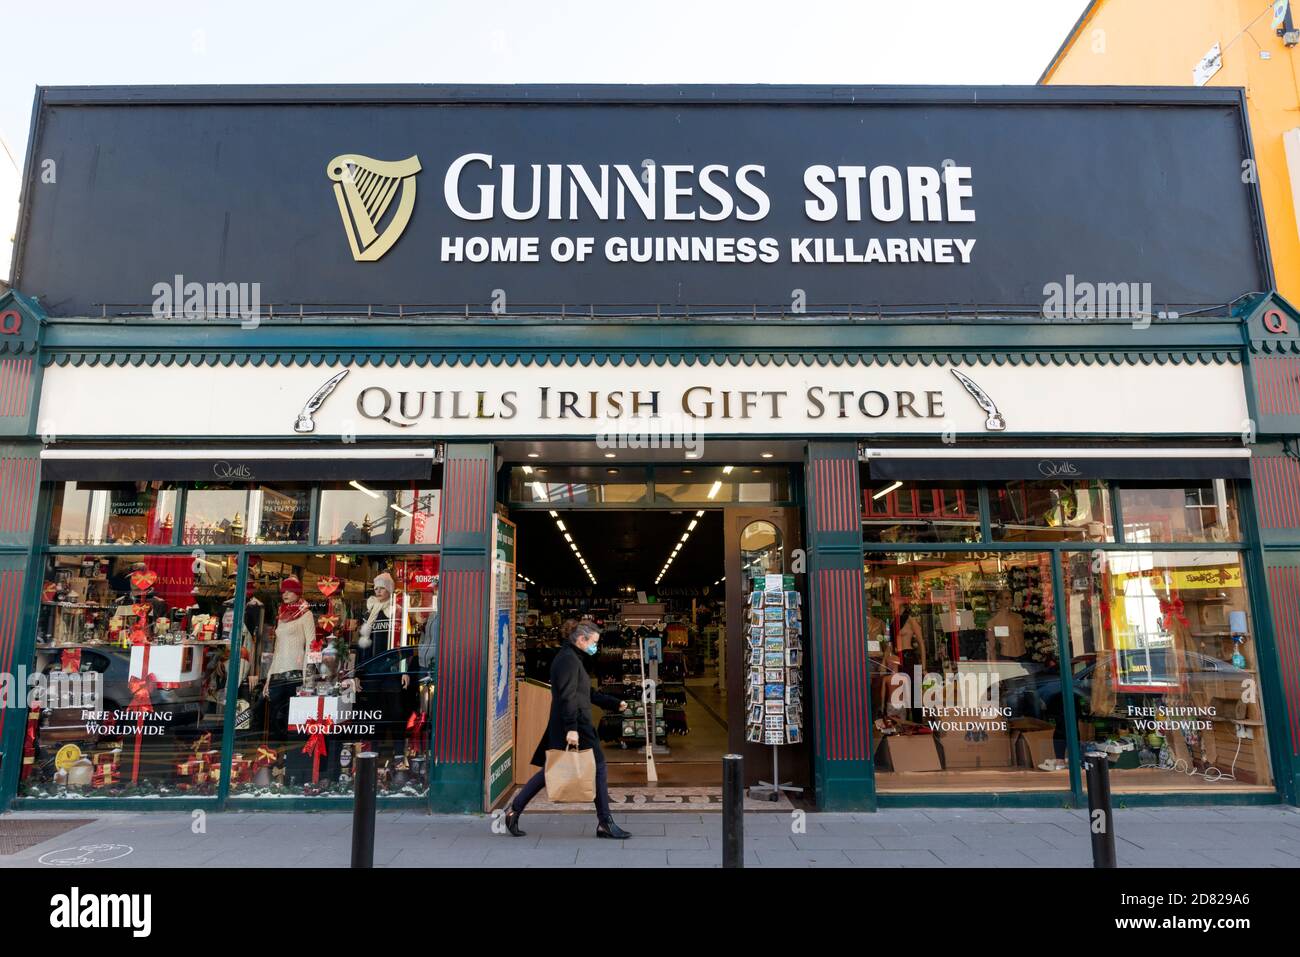 Man wearing face mask passing by the Guinness Store and Quills Irish Gift Store in High Street Killarney County Kerry Ireland Stock Photo